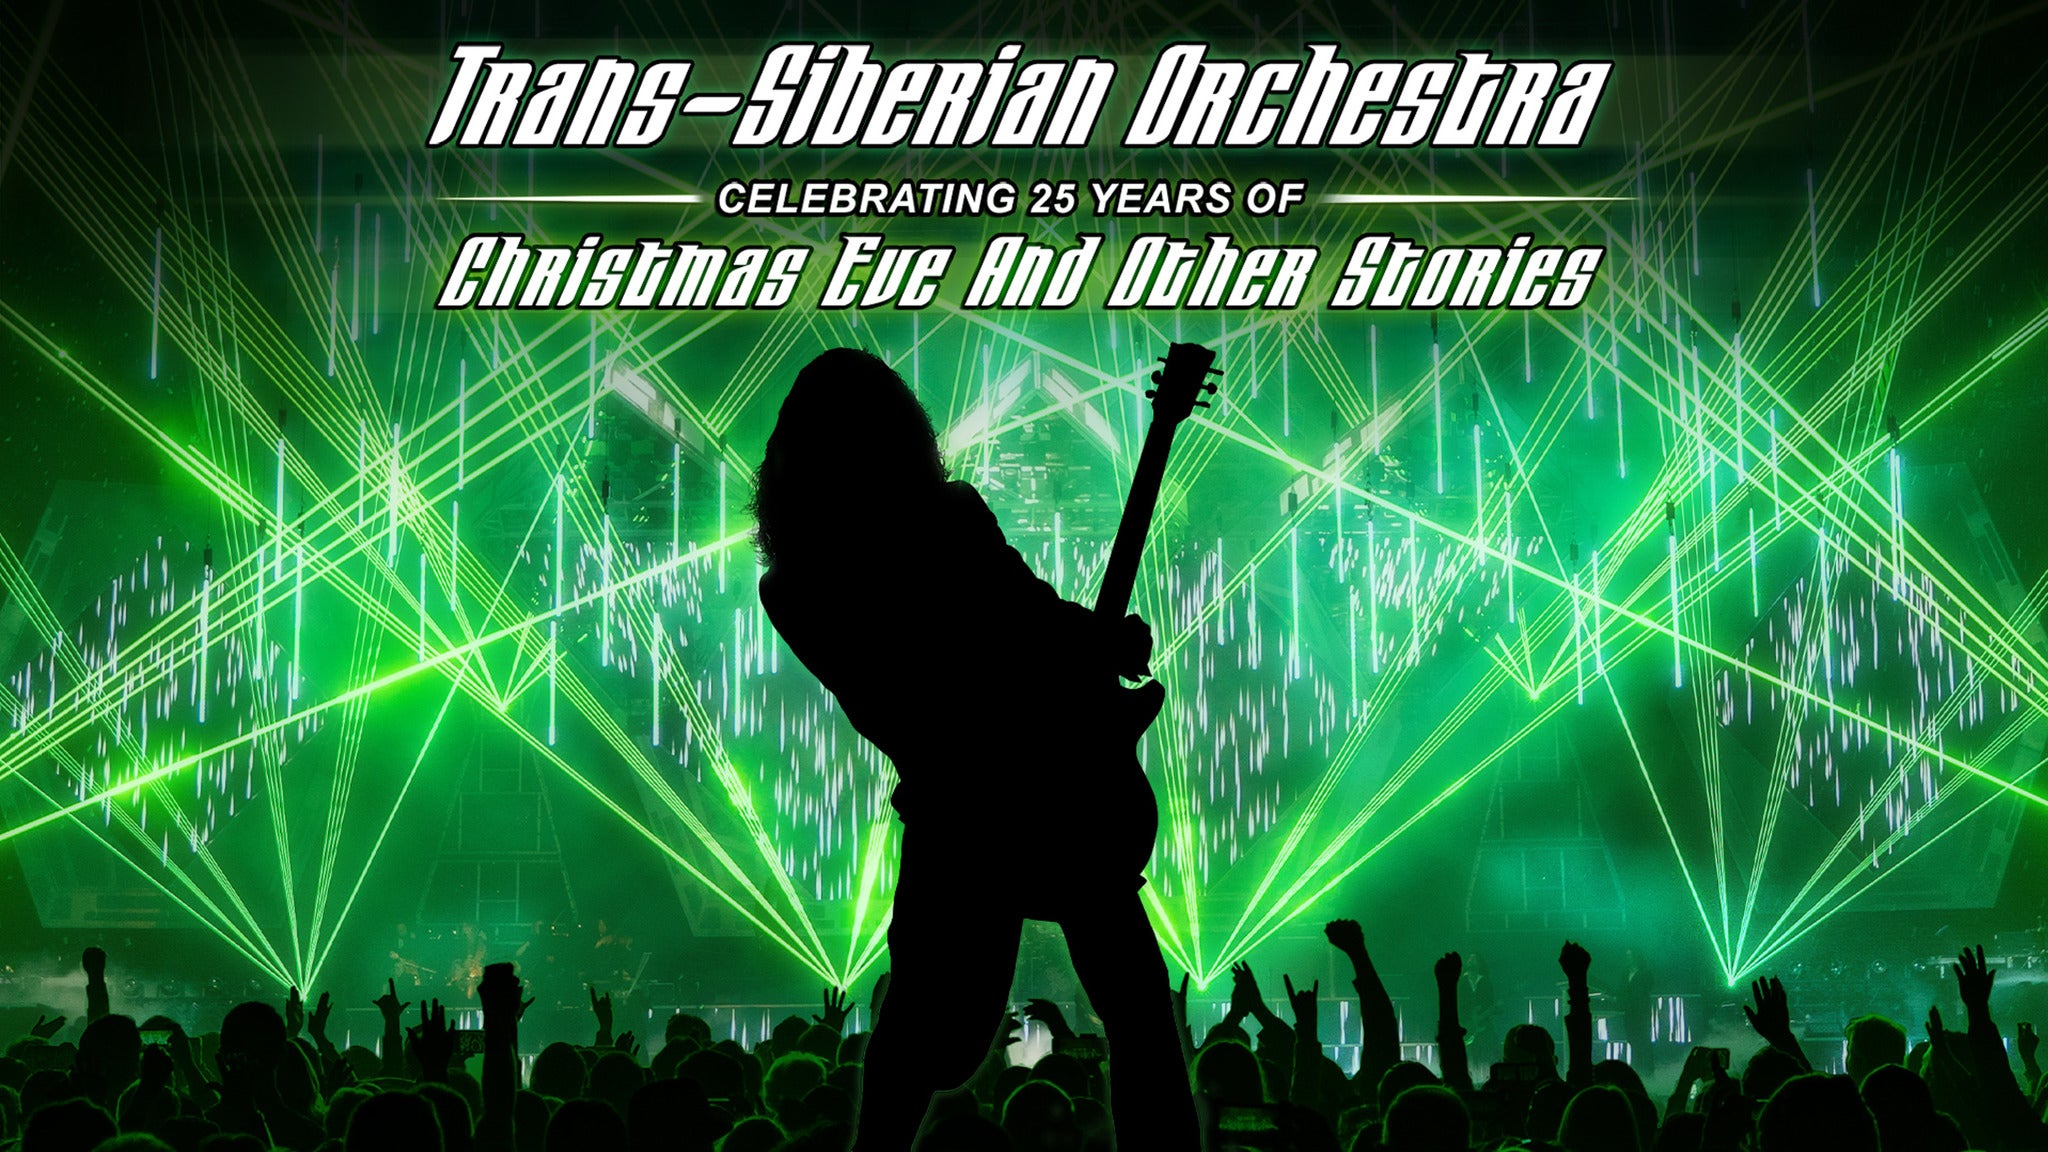 Trans-Siberian Orchestra-Christmas Eve & Other Stories in Manchester event information